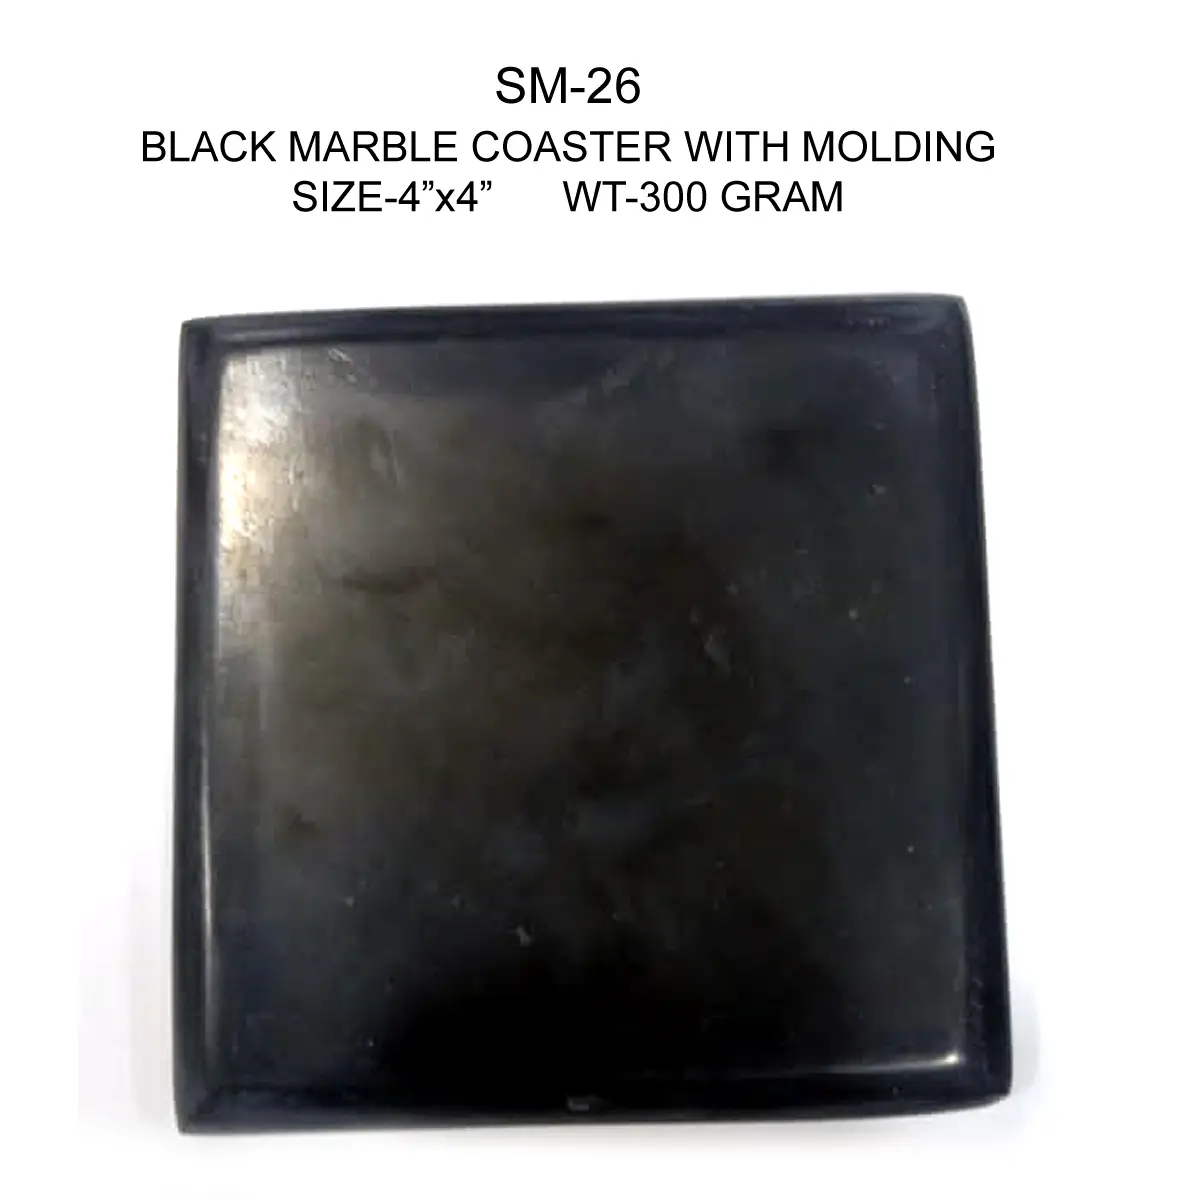 BLACK MARBLE COASTER WITH MOLDING